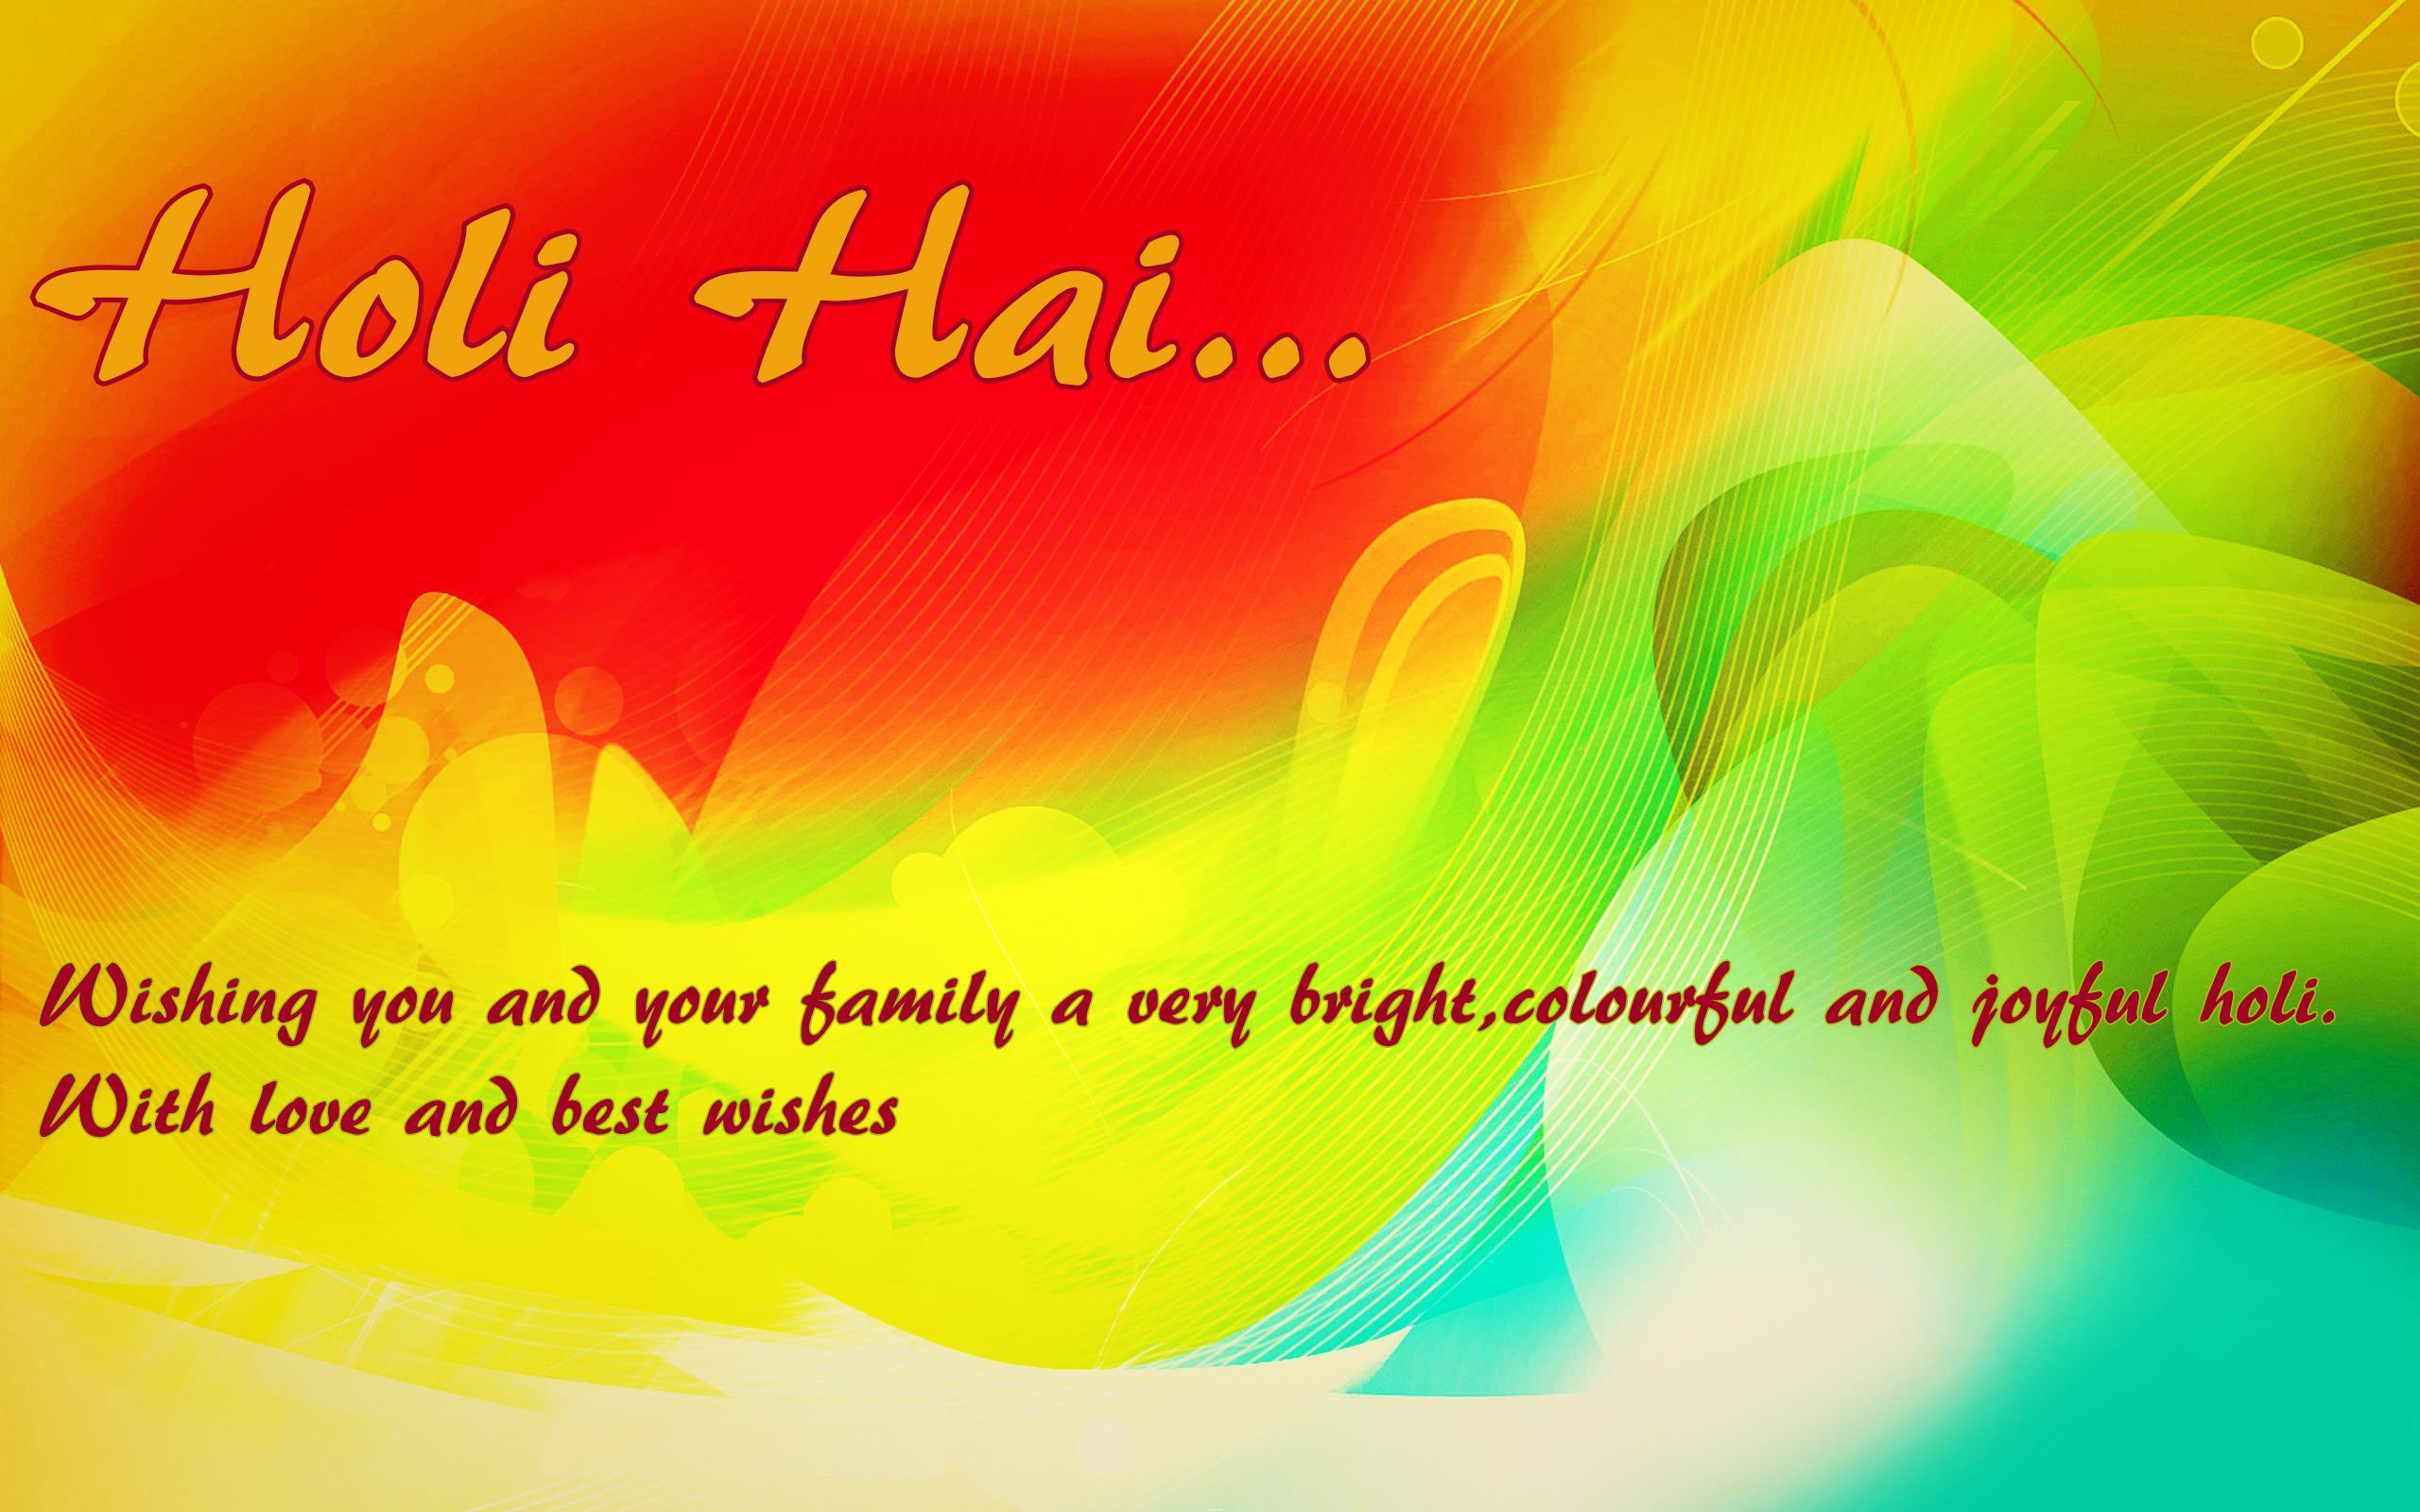 Holi Wallpapers, Friendship Day Images And Diwali Wallpapers - Holi Wishes For Family - HD Wallpaper 